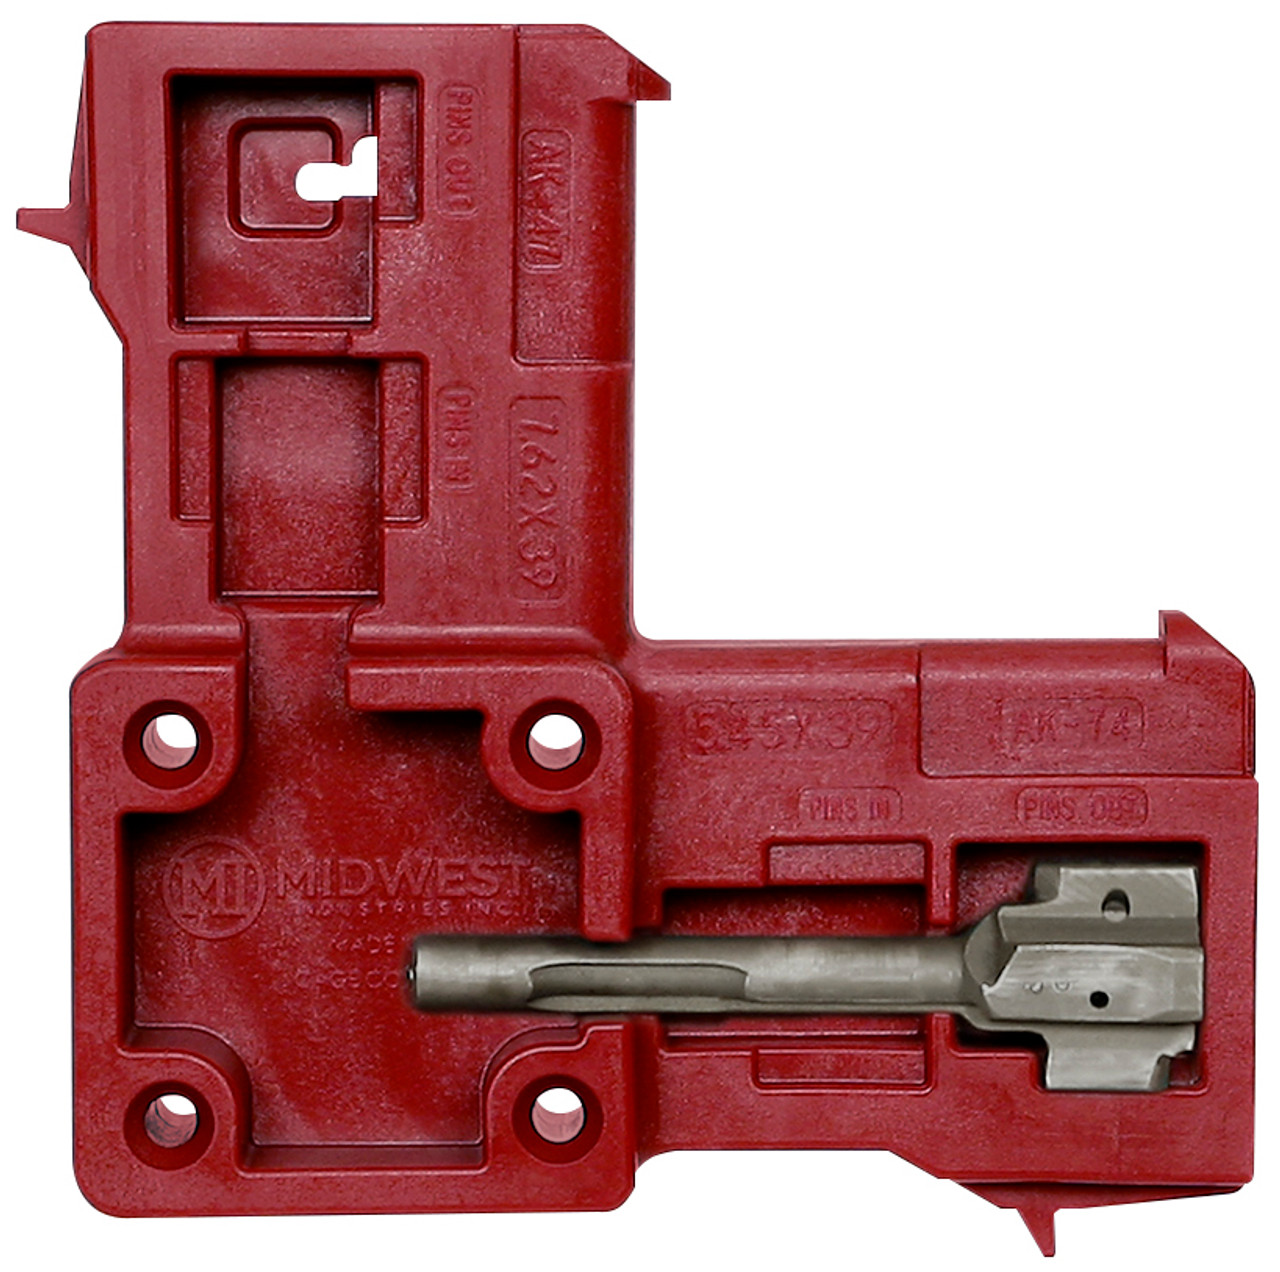 Midwest Industries AK Receiver Maintenance Block Polymer Construction,  Compatible with AK47/AK74 Receivers